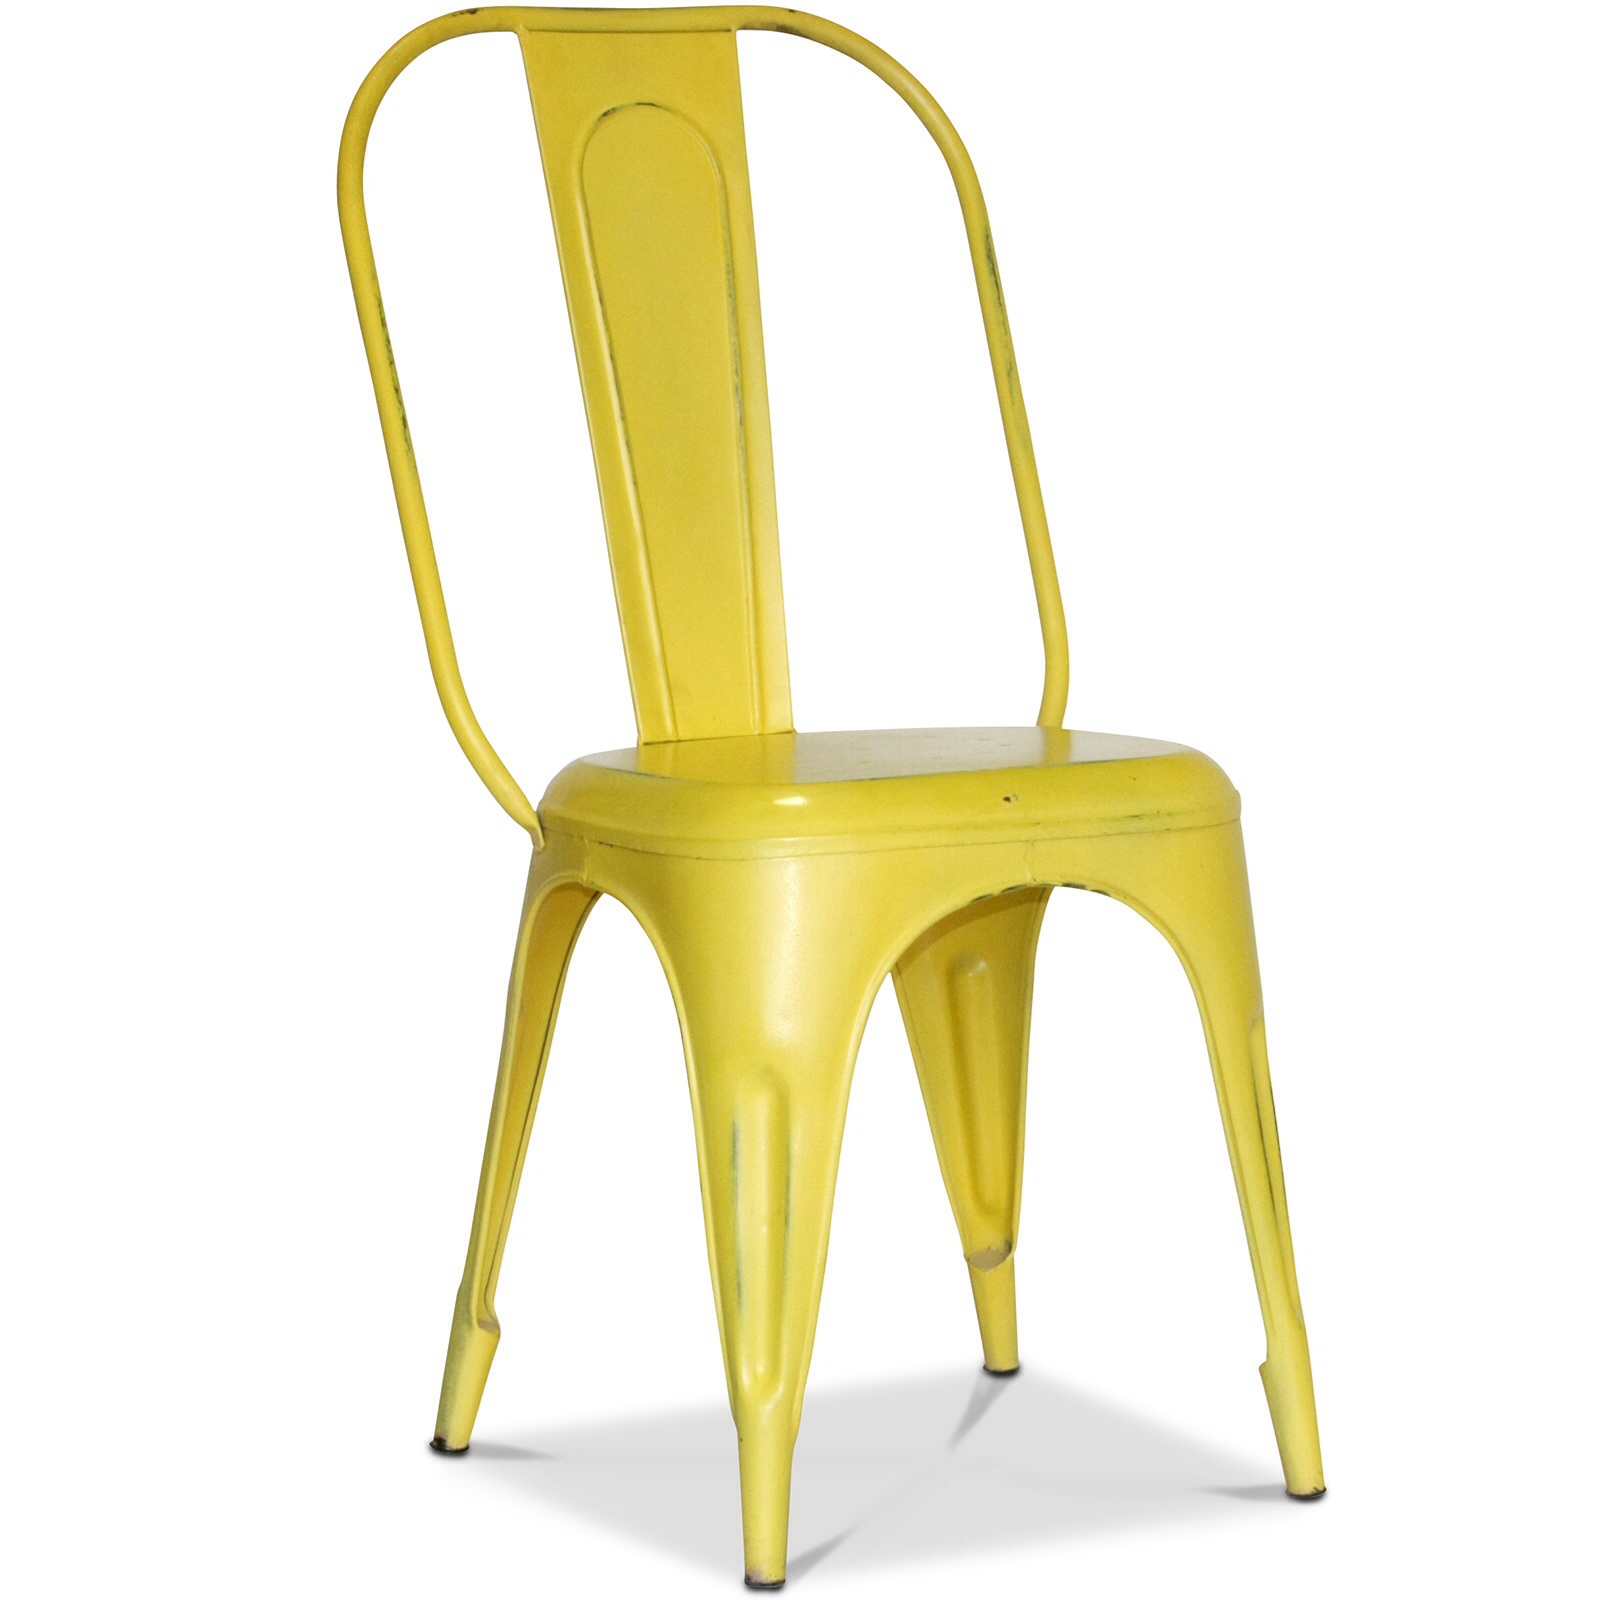 Bistro Retro Chair 450 mm high weathered Yellow